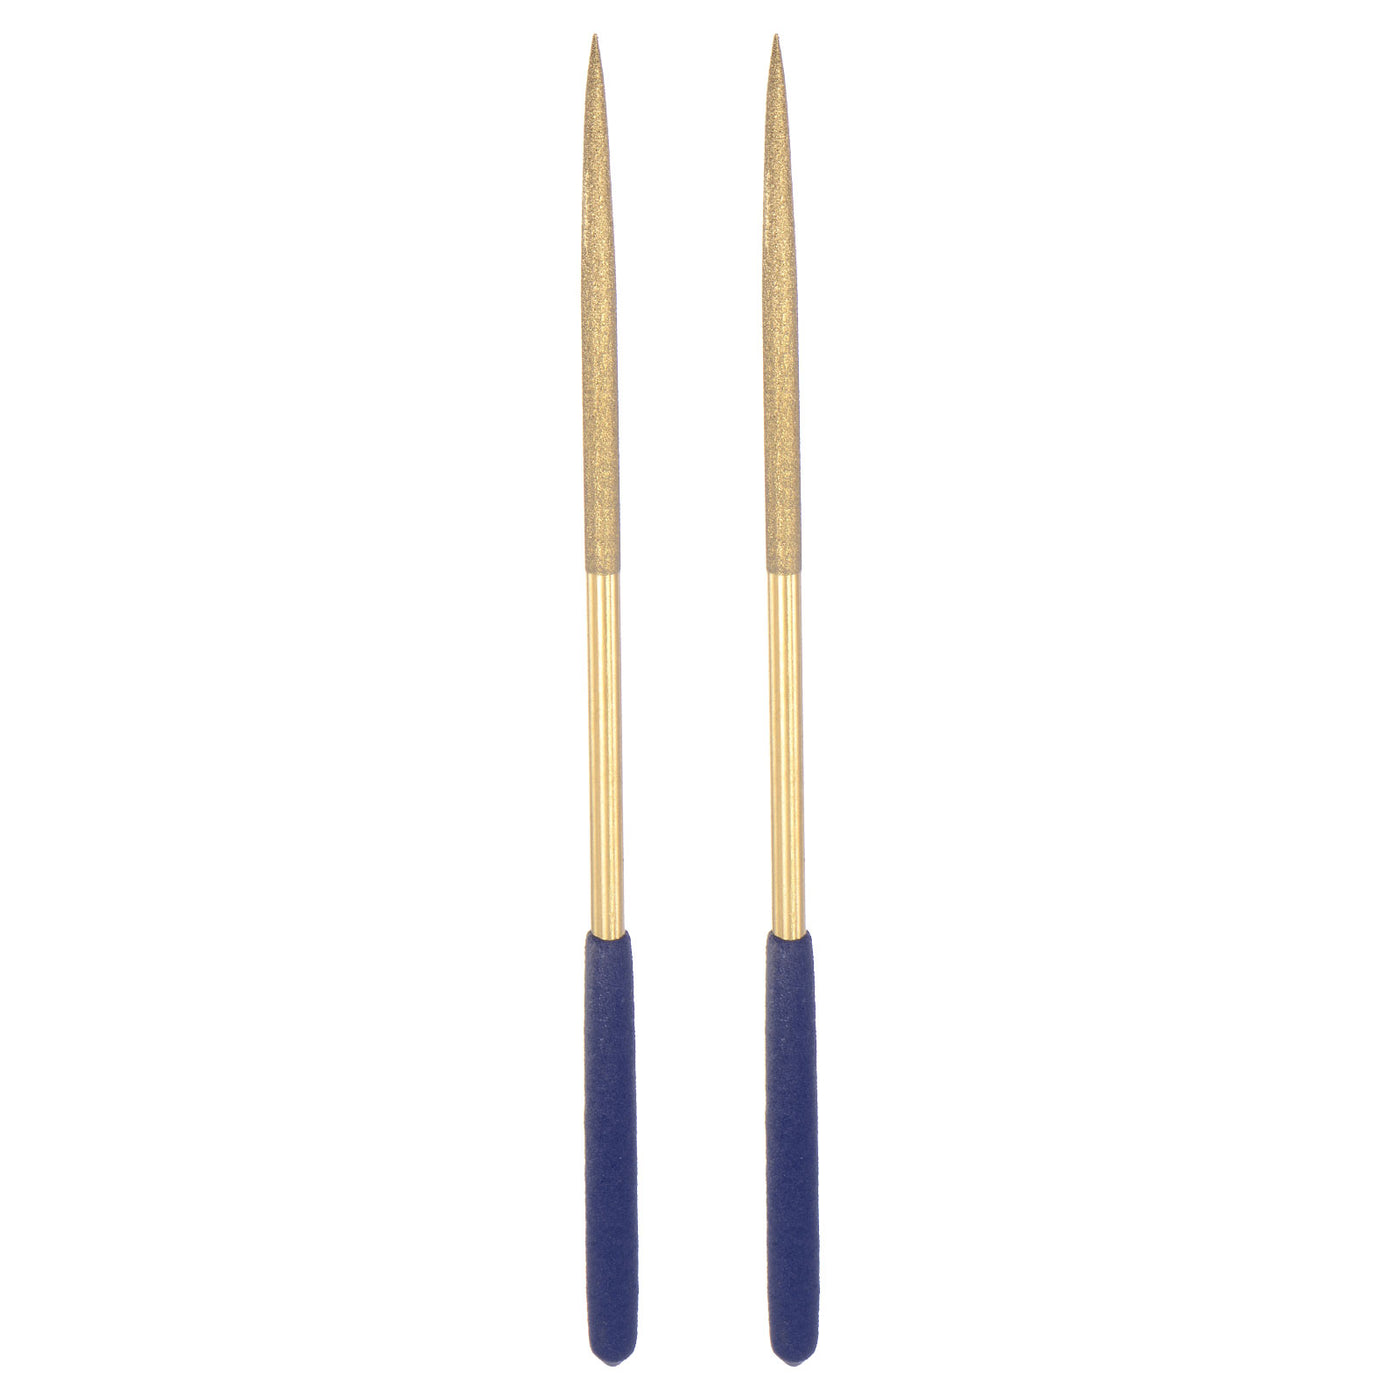 Uxcell Uxcell 5mm x 180mm Titanium Coated Round Diamond Needle Files with TPU Handle 2pcs